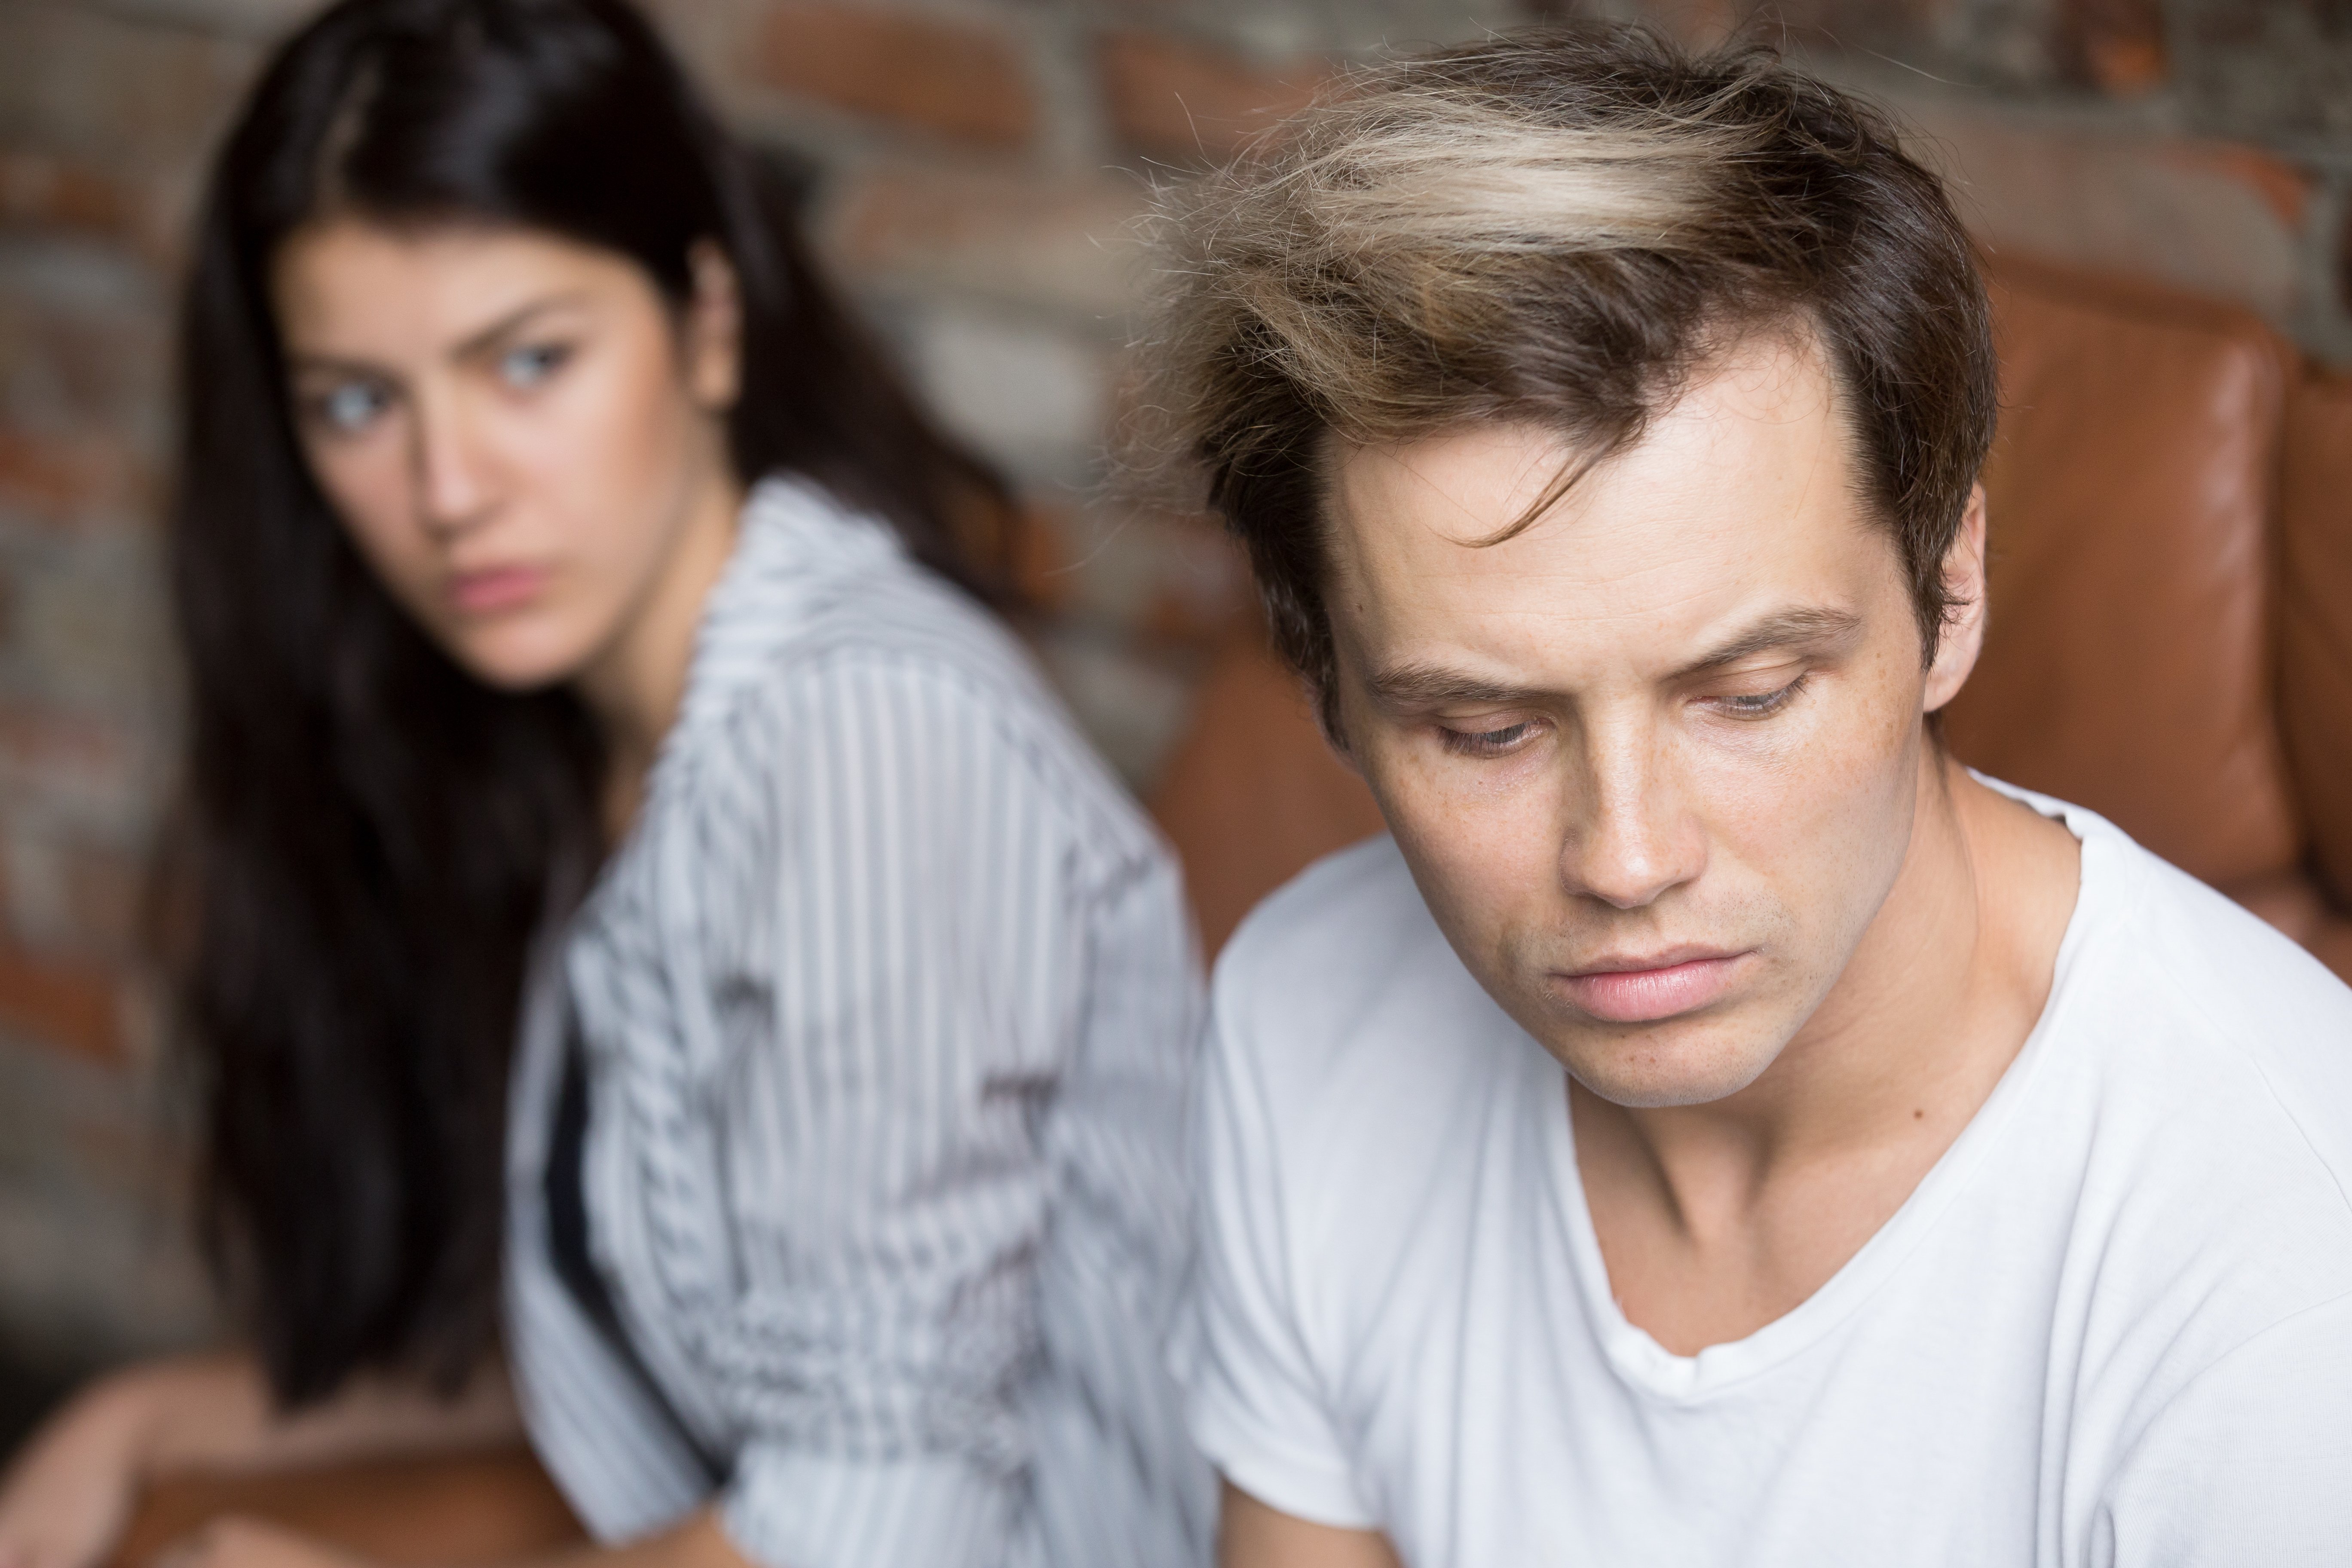 Couple angry at each other | Photo: Shutterstock